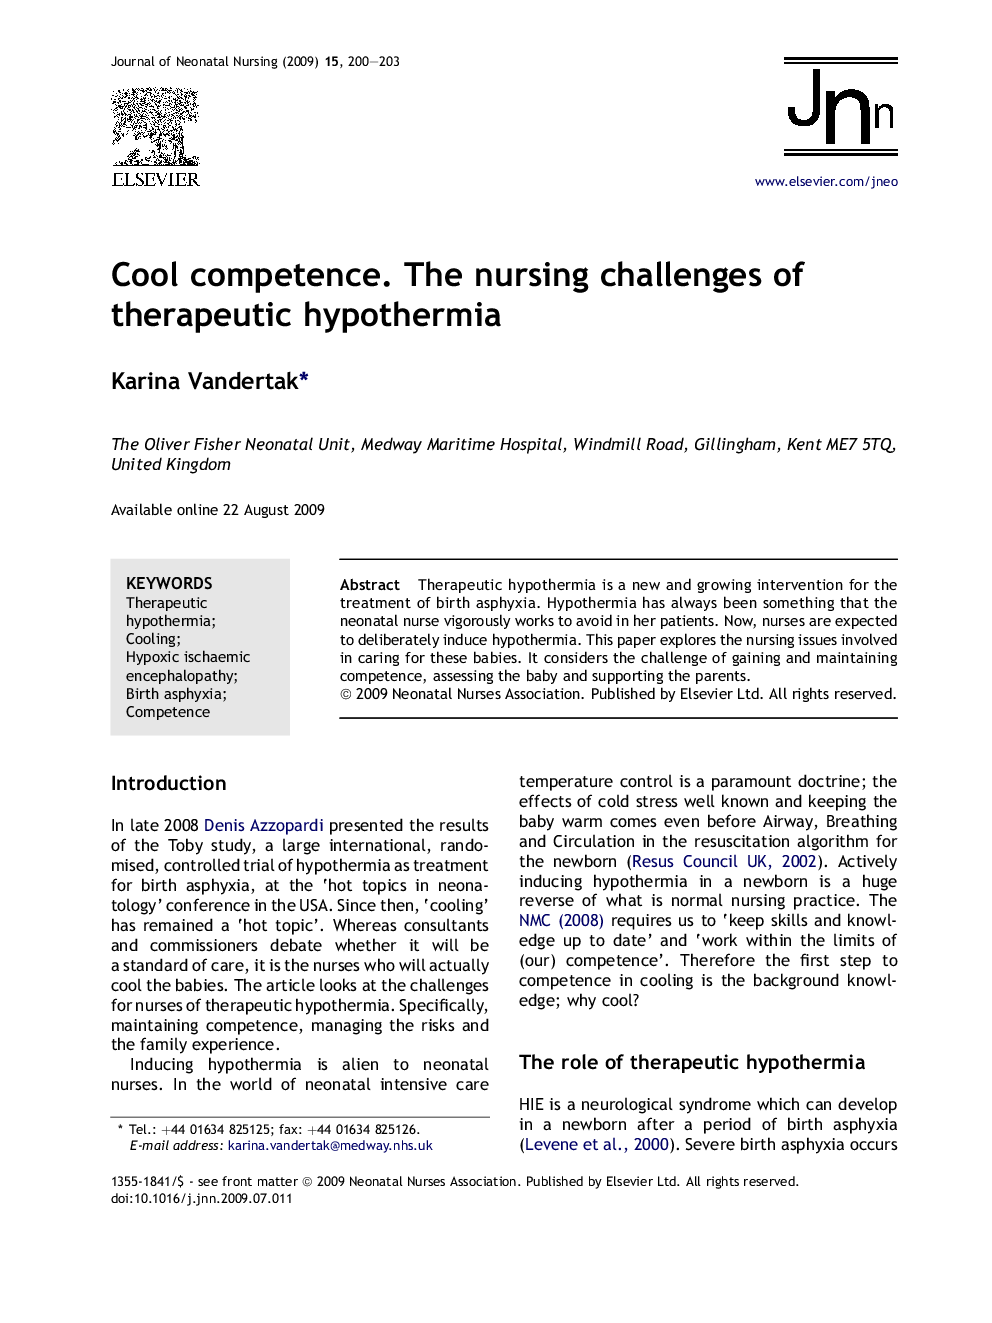 Cool competence. The nursing challenges of therapeutic hypothermia